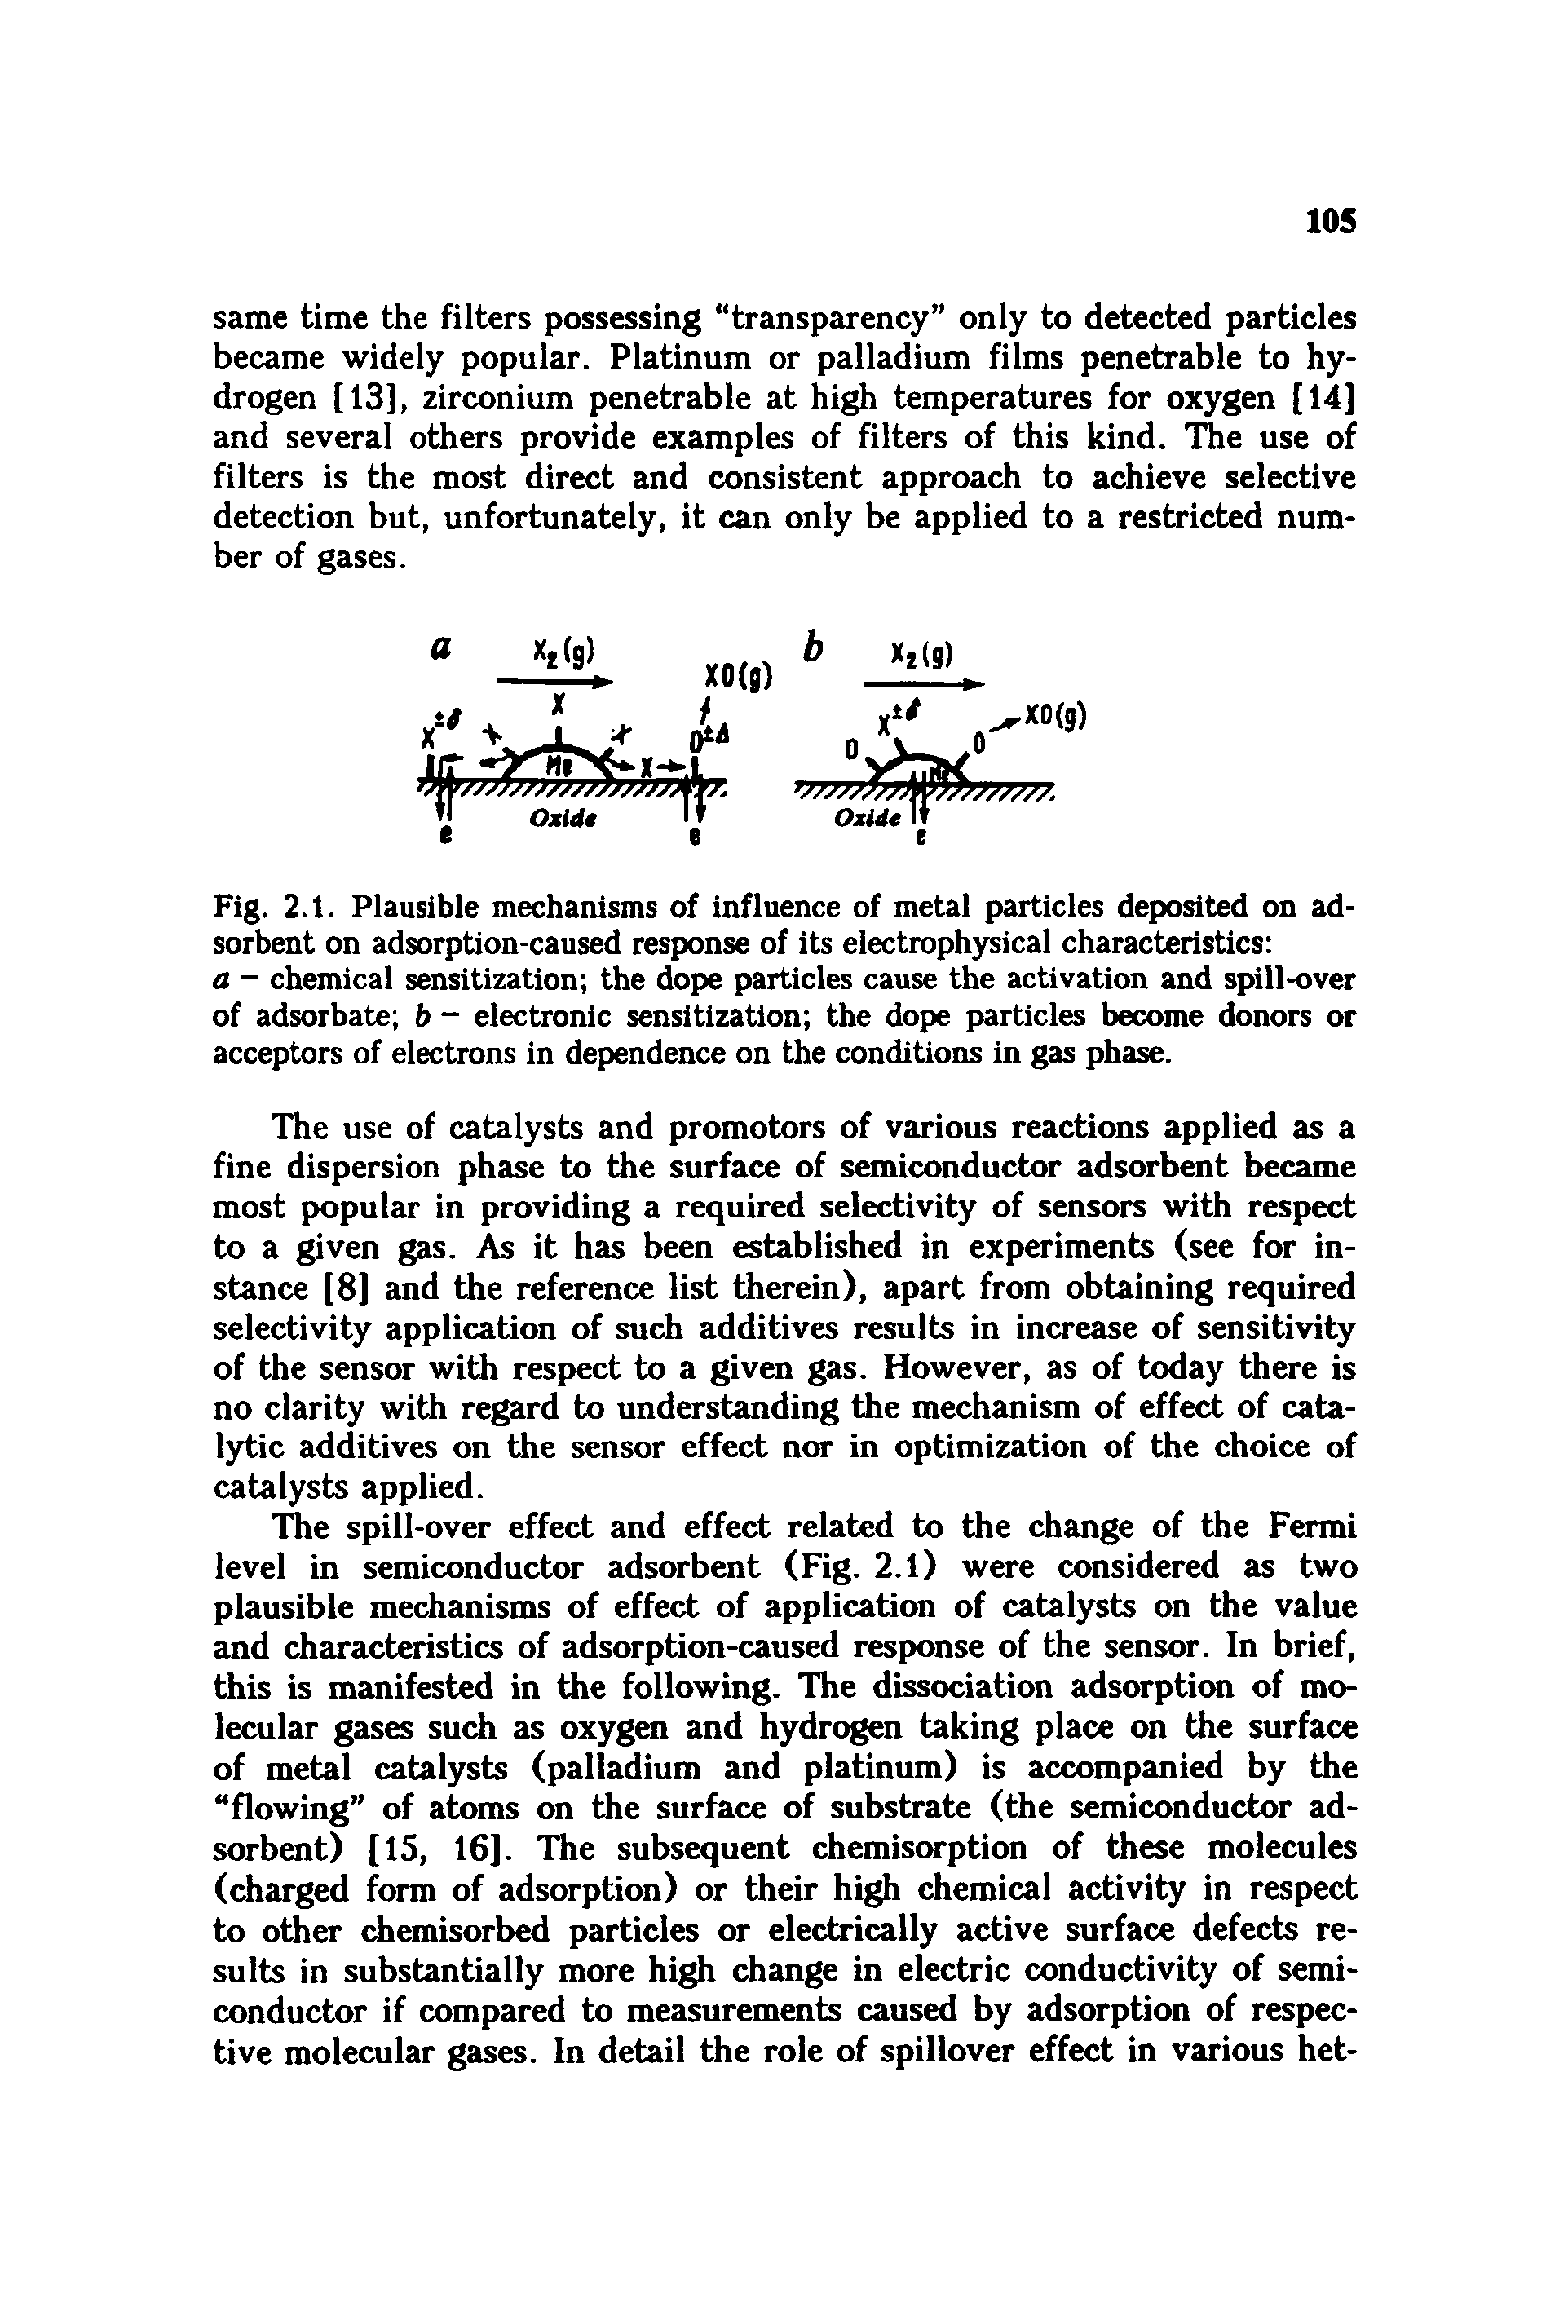 Fig. 2.1. Plausible mechanisms of influence of metal particles deposited on adsorbent on adsorption-caused response of its electrophysical characteristics a - chemical sensitization the dope particles cause the activation and spill-over of adsorbate b - electronic sensitization the dope particles become donors or acceptors of electrons in dependence on the conditions in gas phase.